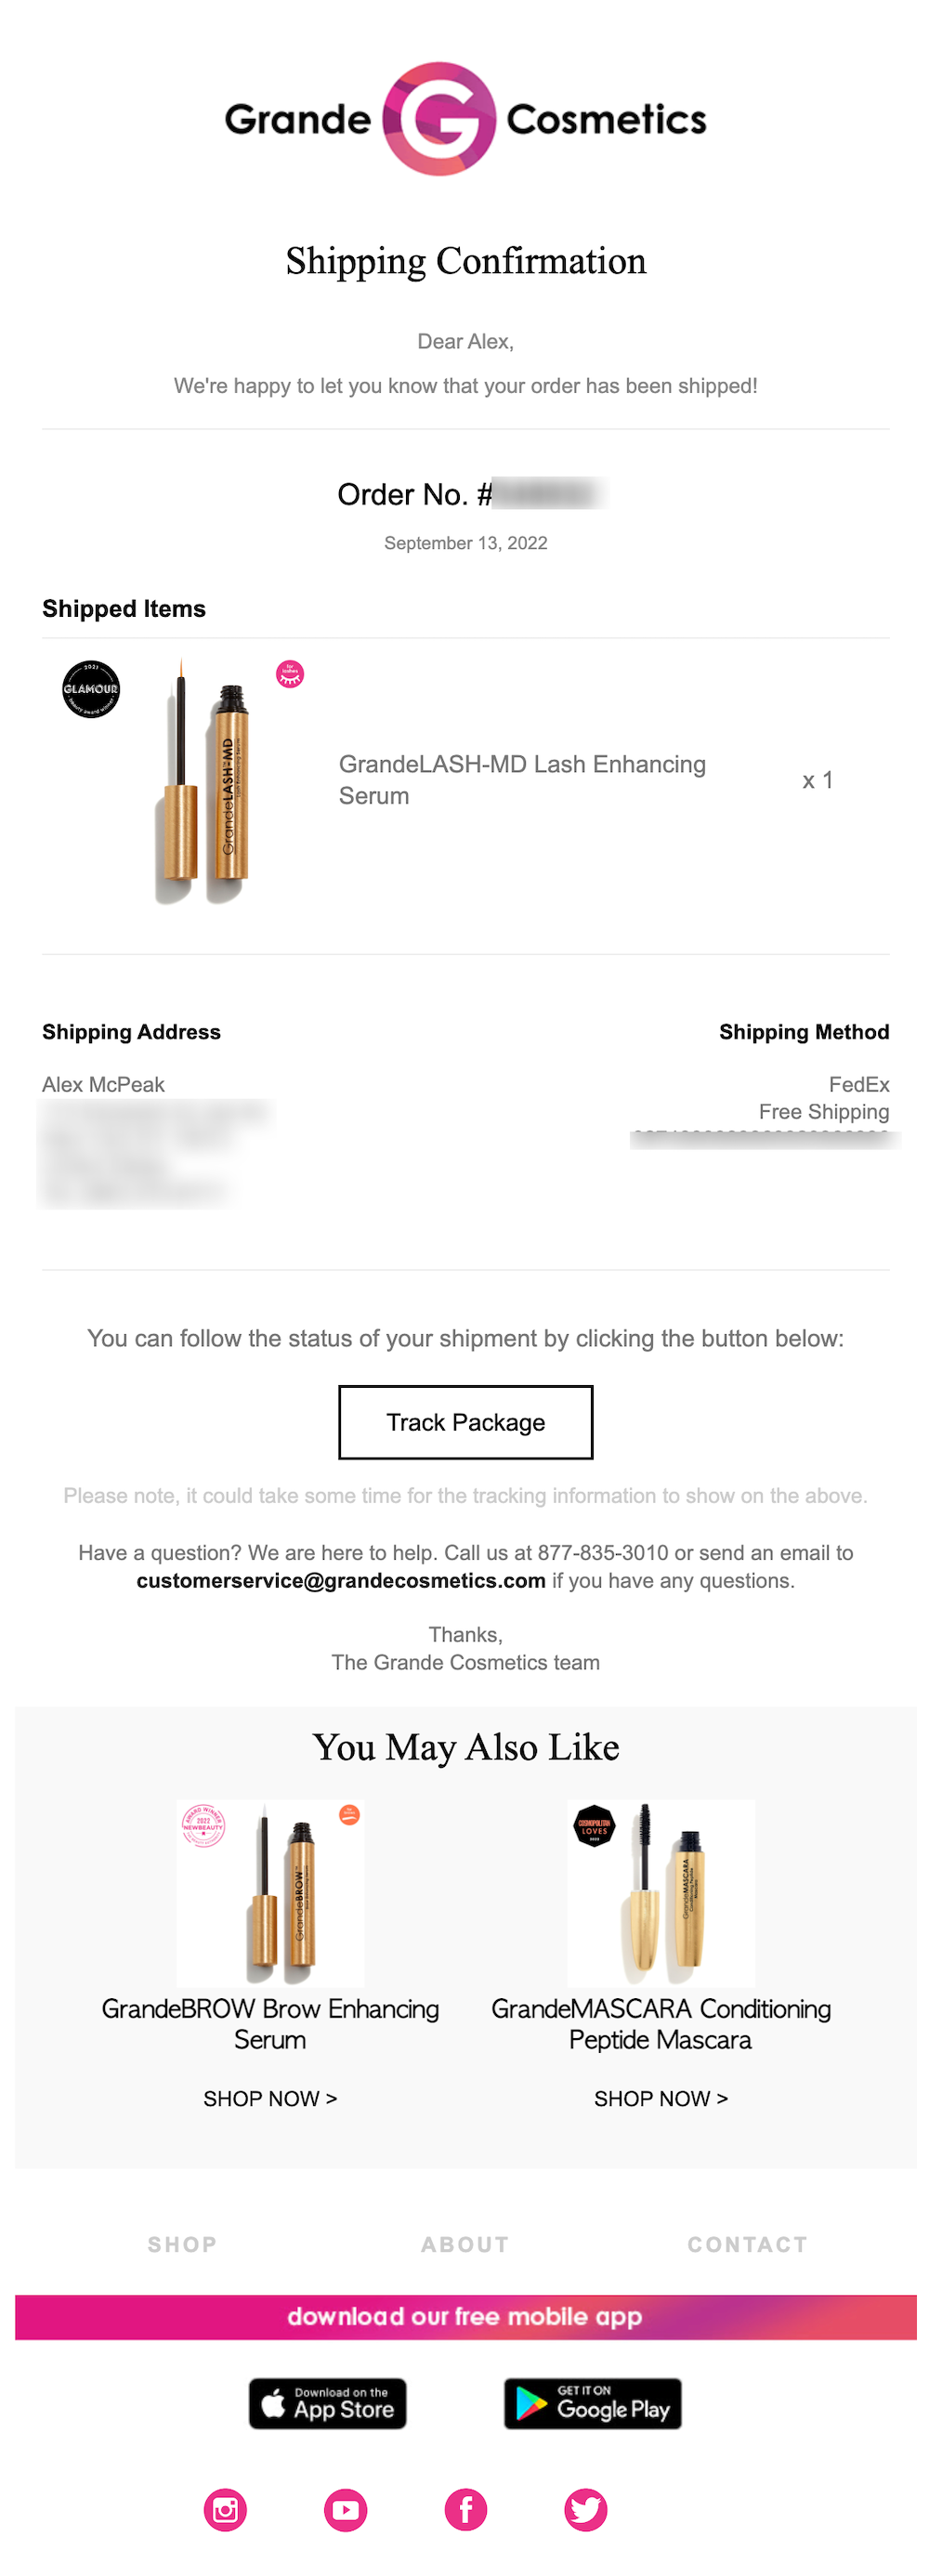 From order number, tracking link, product image, shipping address, and method to customer support contact information (both phone and email), recommended products, and social media links, this shipping confirmation email from Grande Cosmetics contains all the necessary elements.